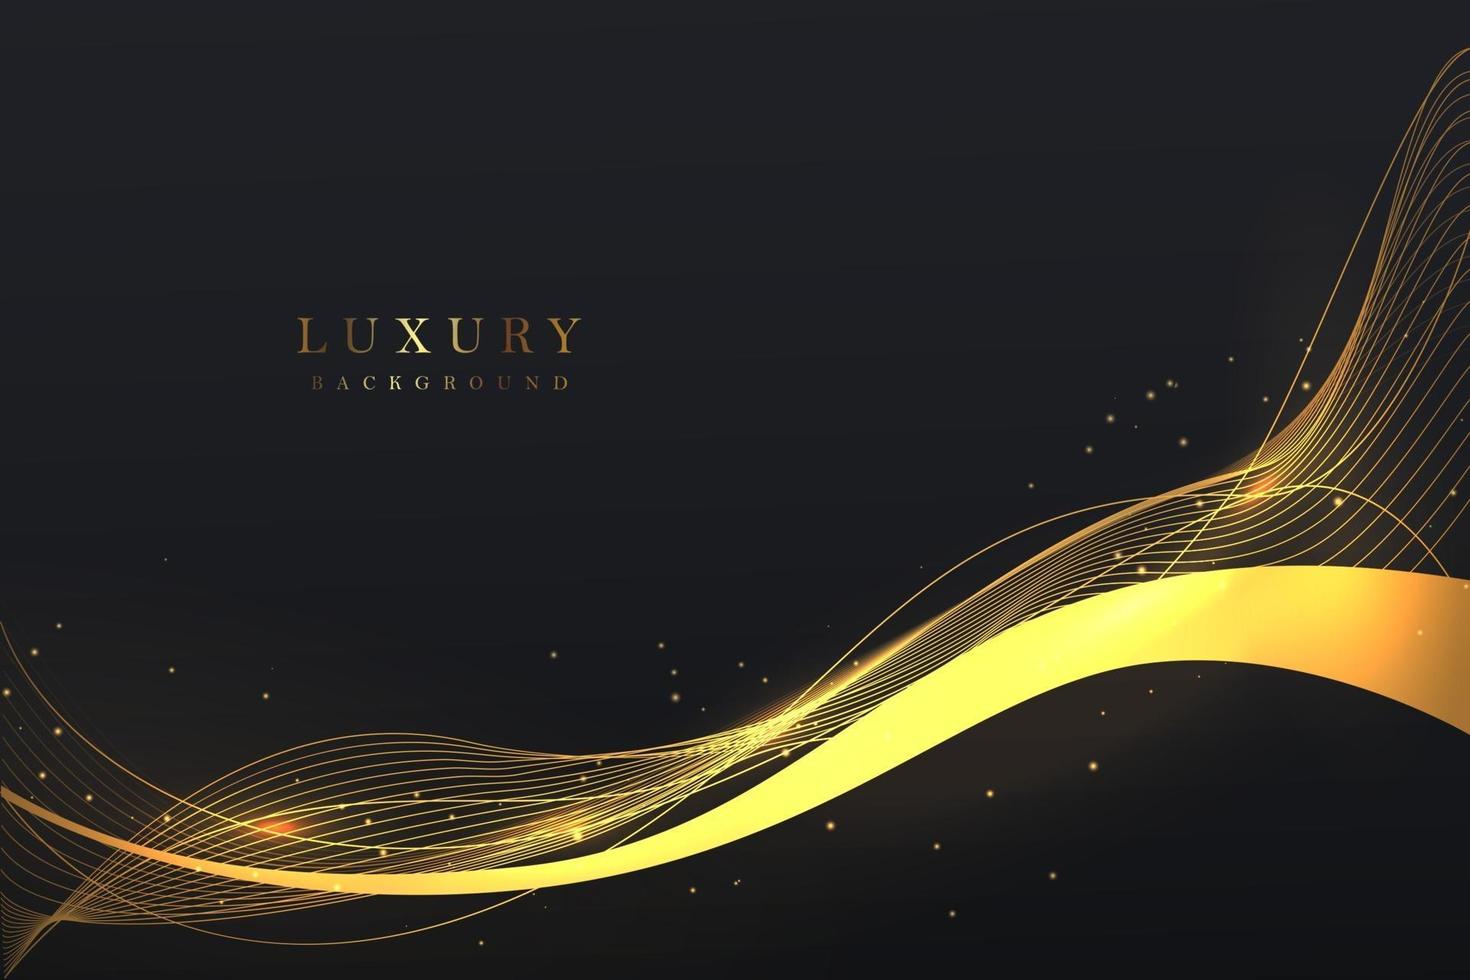 Luxurious black background with a combination of gold shining in a 3D style. Graphic design element. Elegant decoration. EPS 10 vector